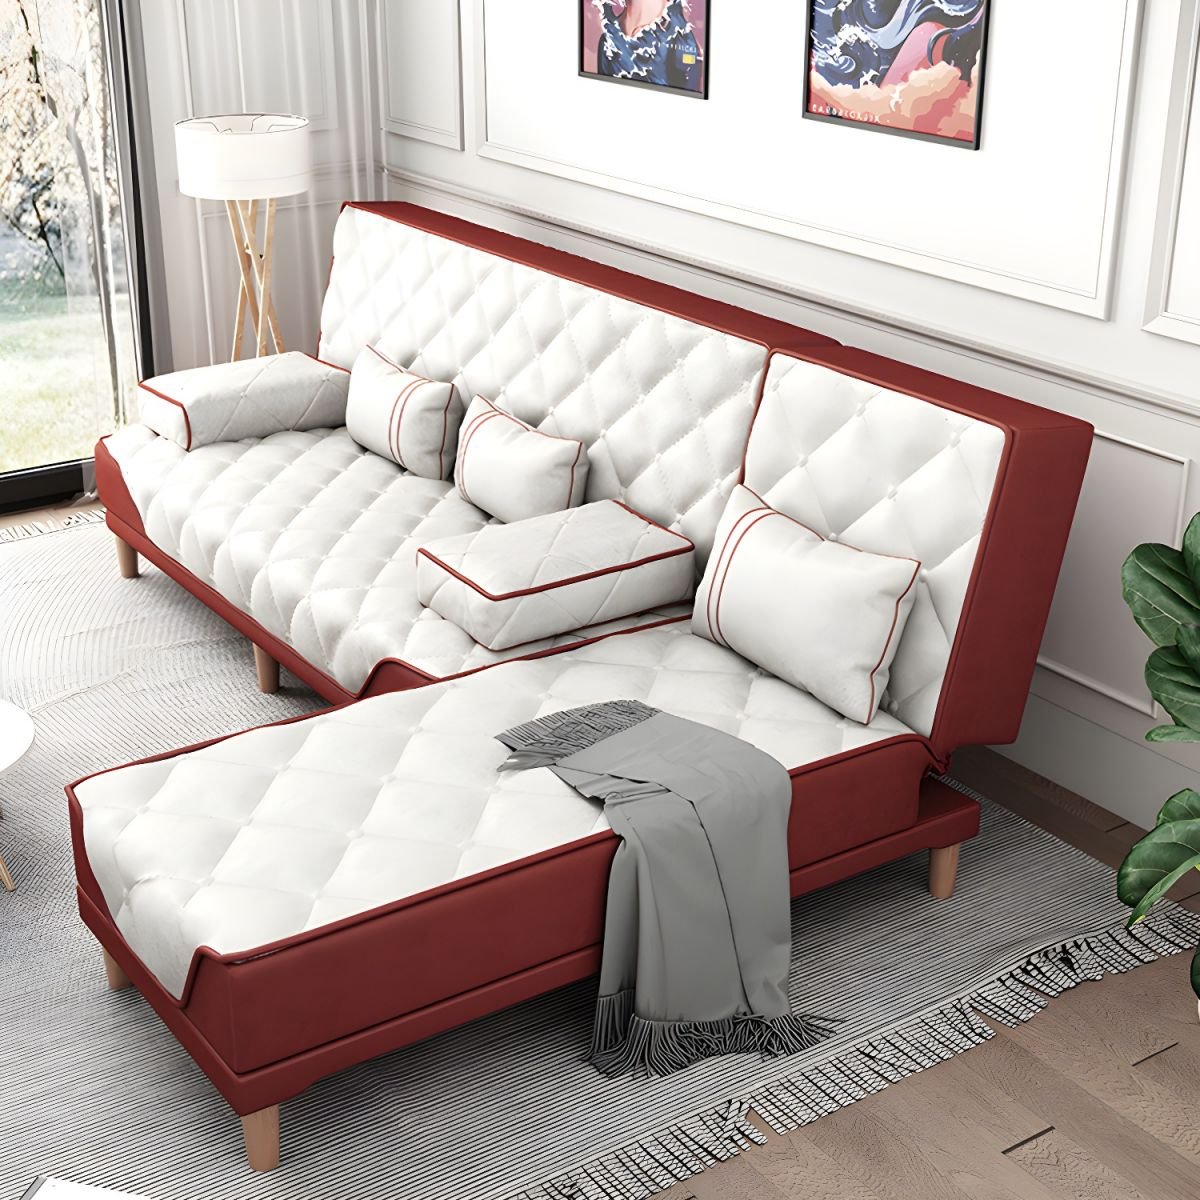 Contemporary Tight Back Convertible Sofa and Chaise with Pillow Top Arm - 73"L x 57"W x 34"H Red-White Tech Cloth